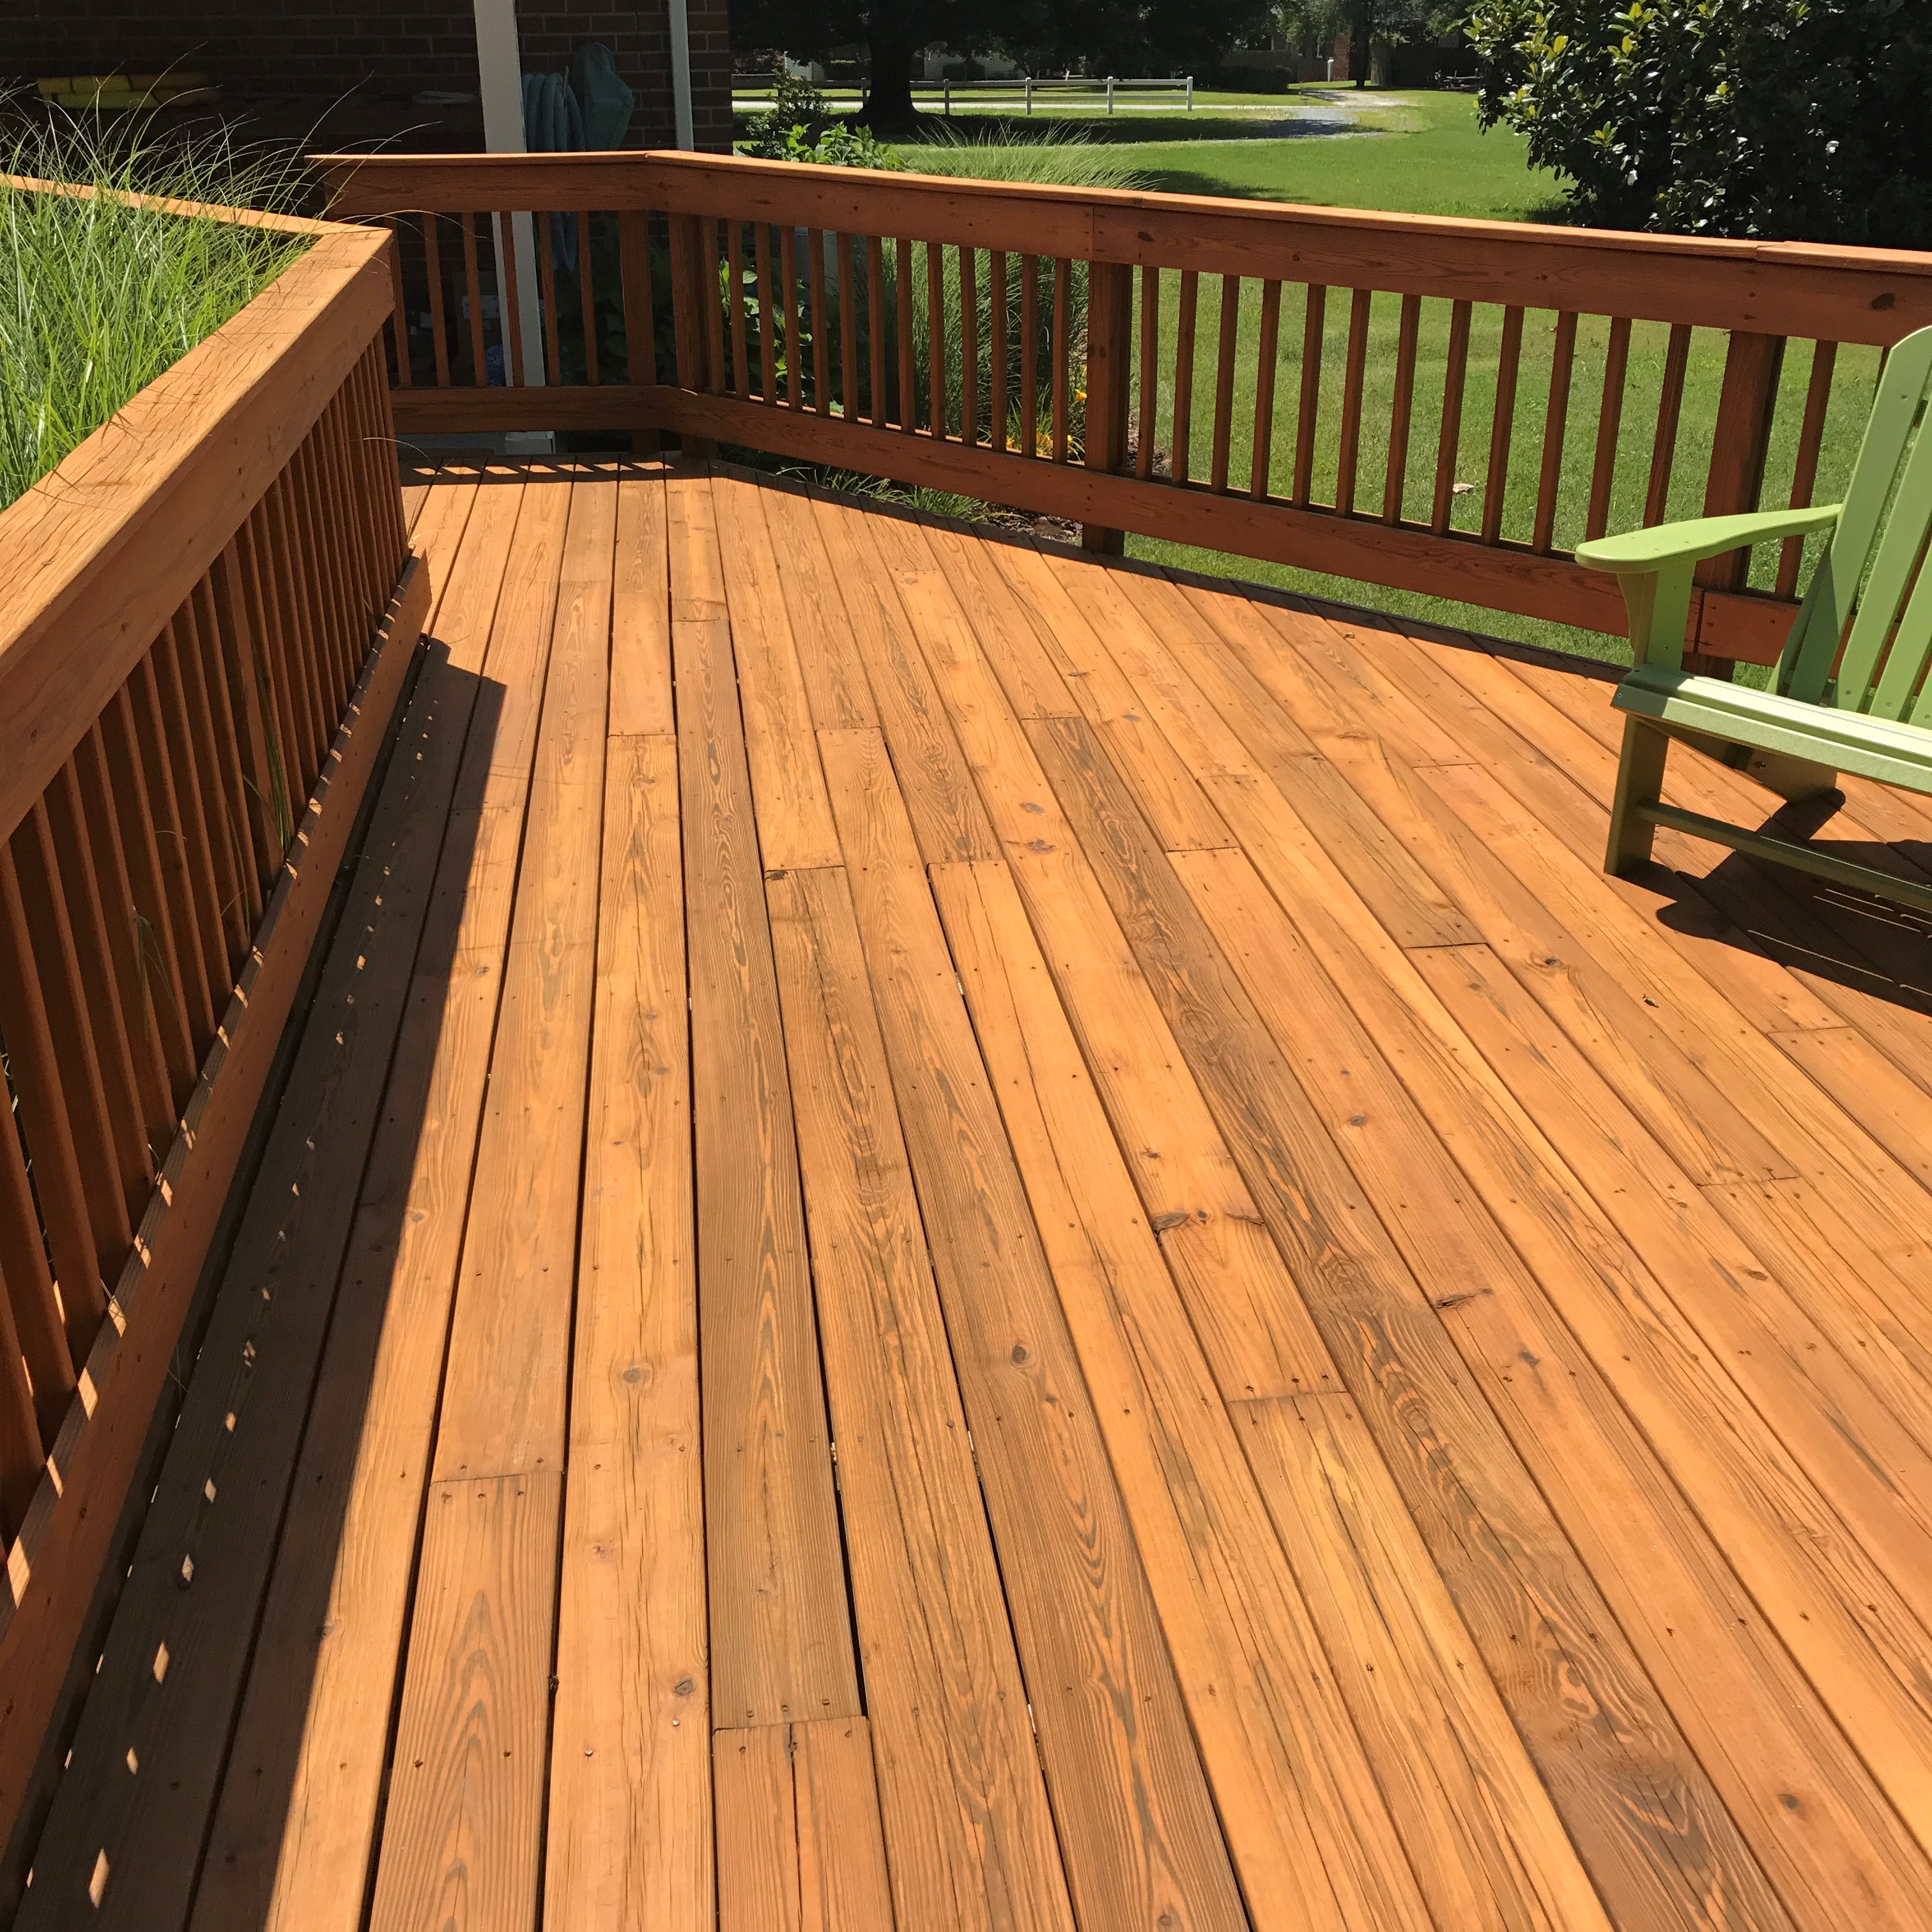 Deck floor with gold stain